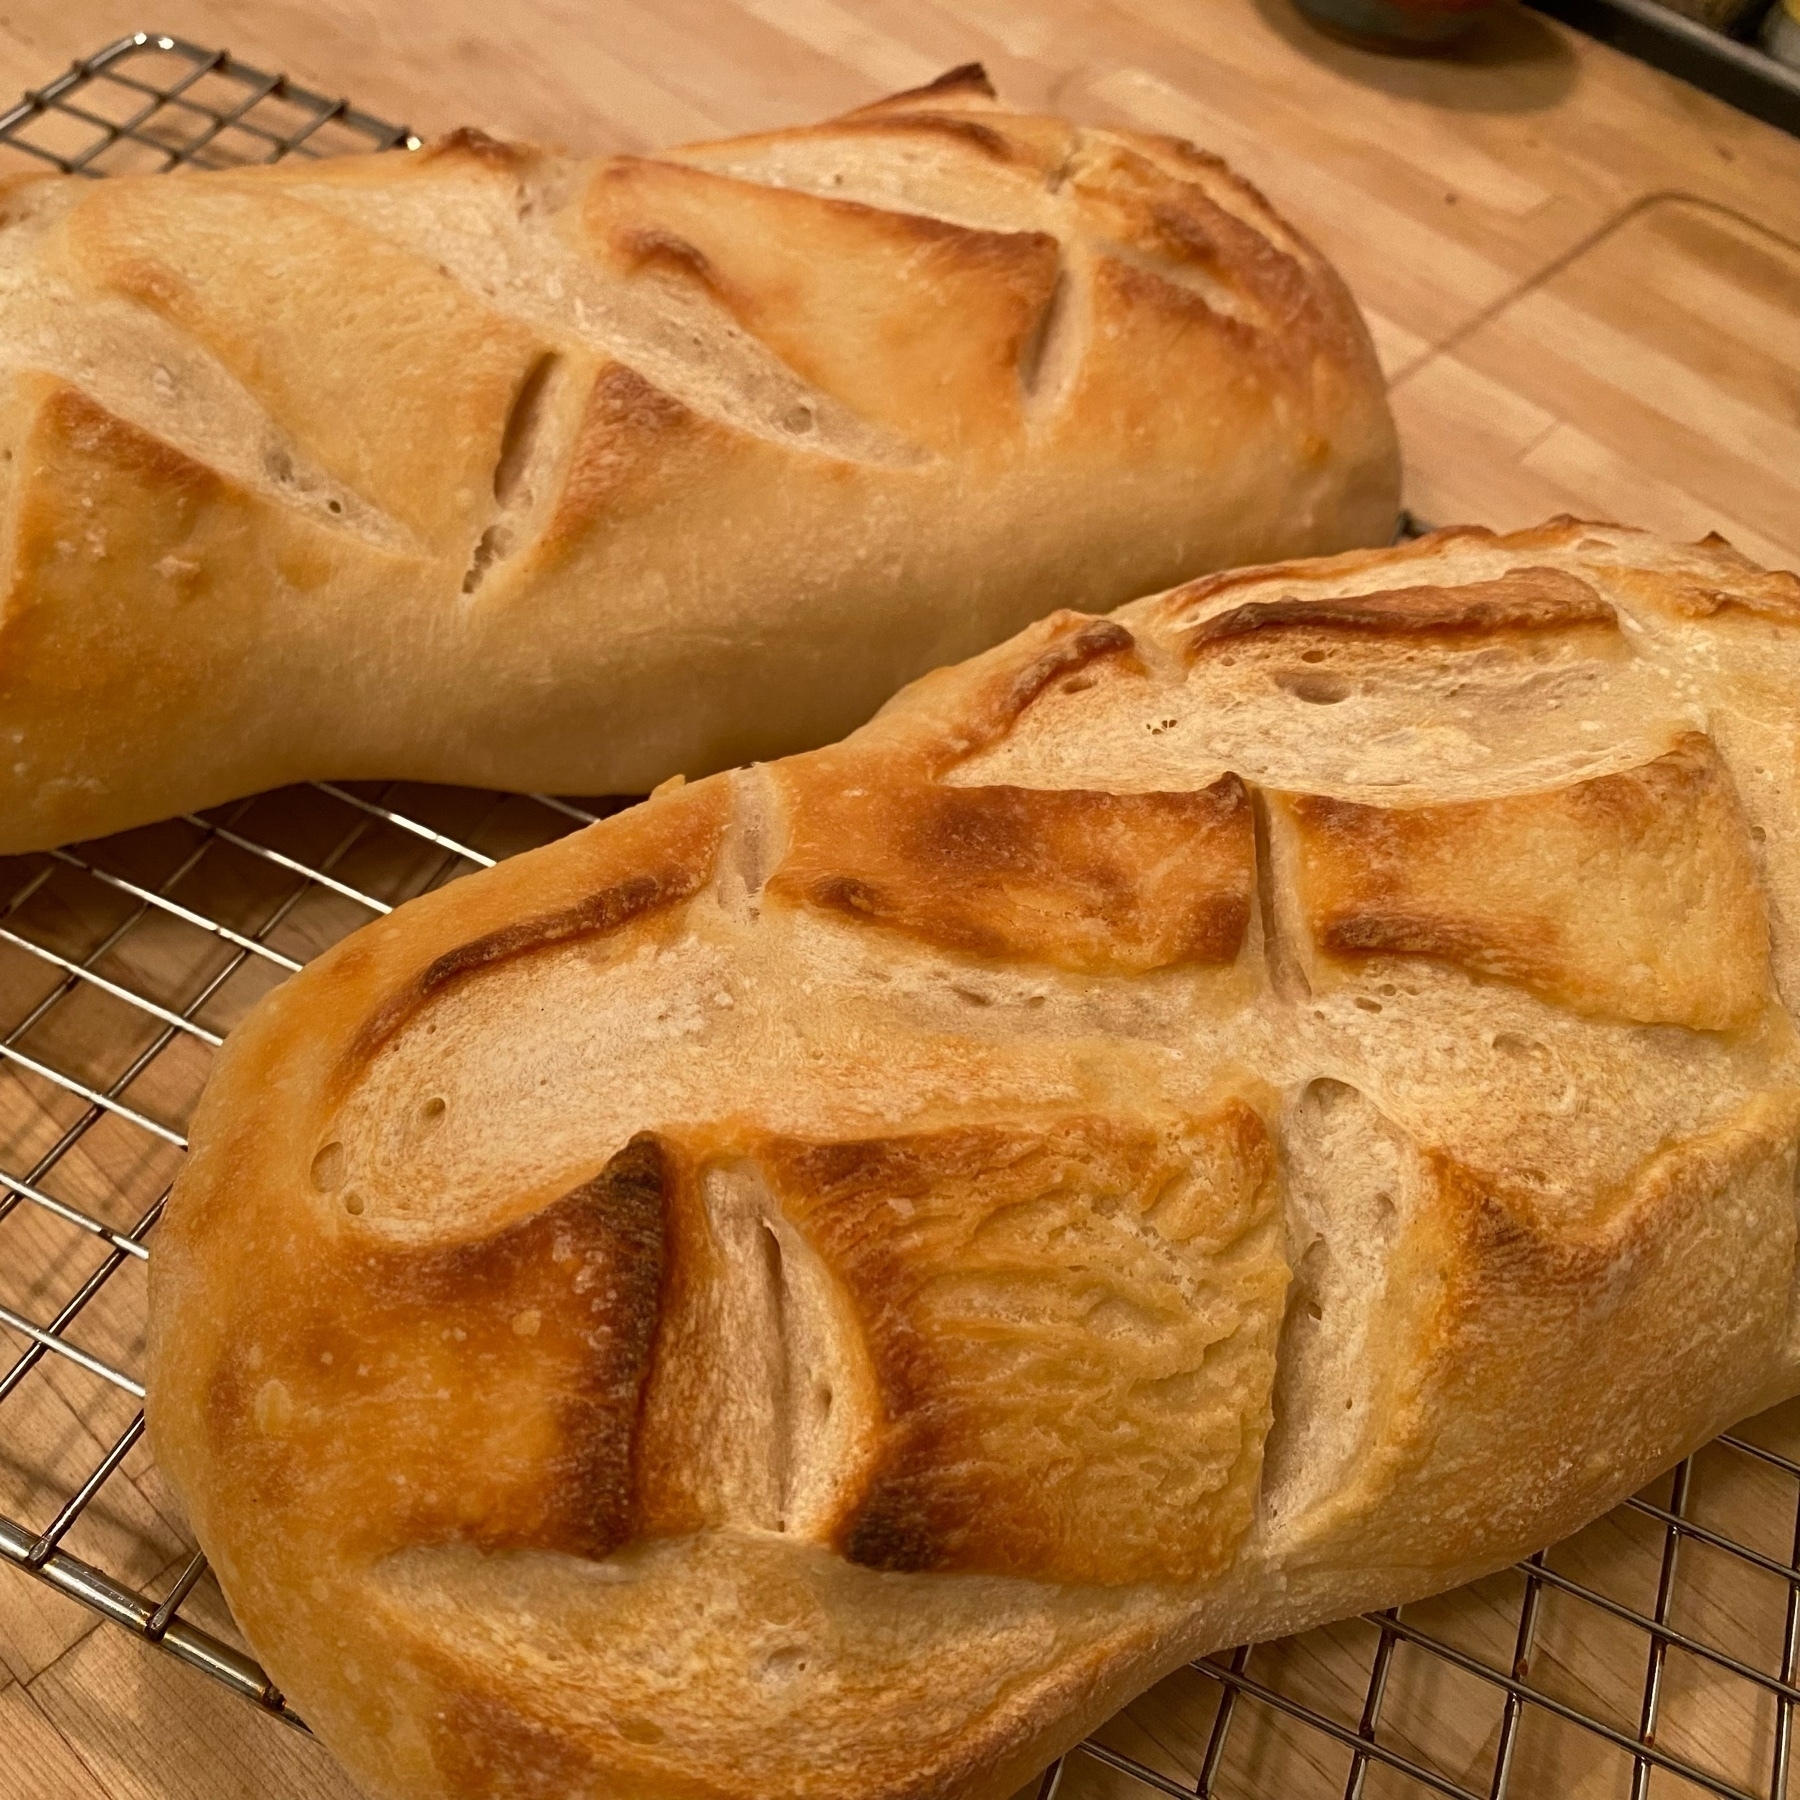 picture of two loa es of freshly baked bread with criss-cross slash patterns on top